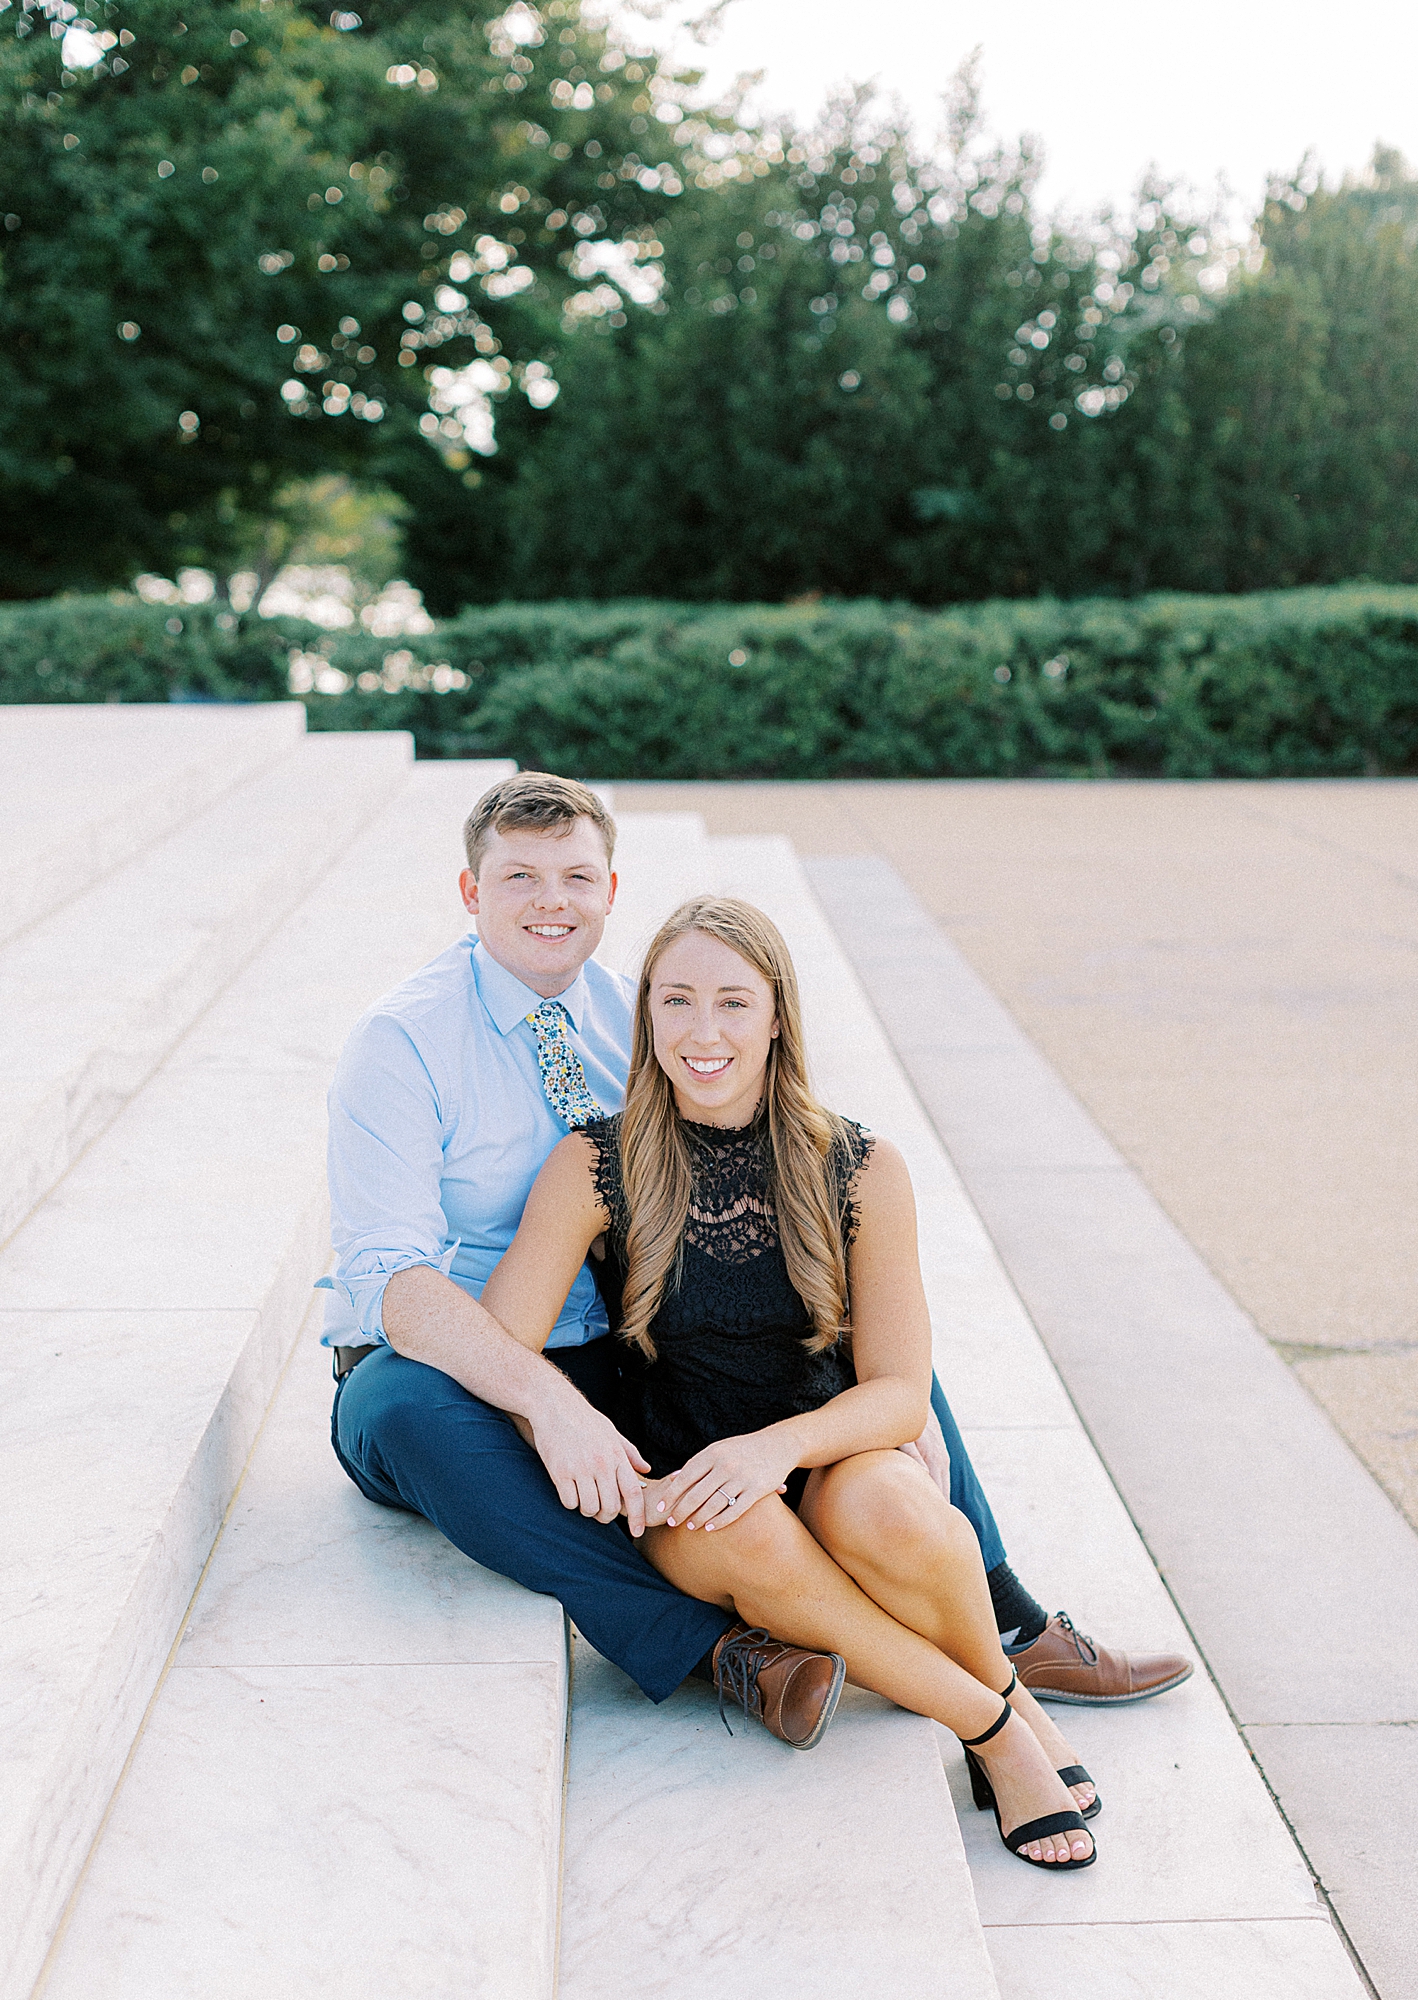 Couple sitting on the steps at Jefferson Memorial smiling at camera.